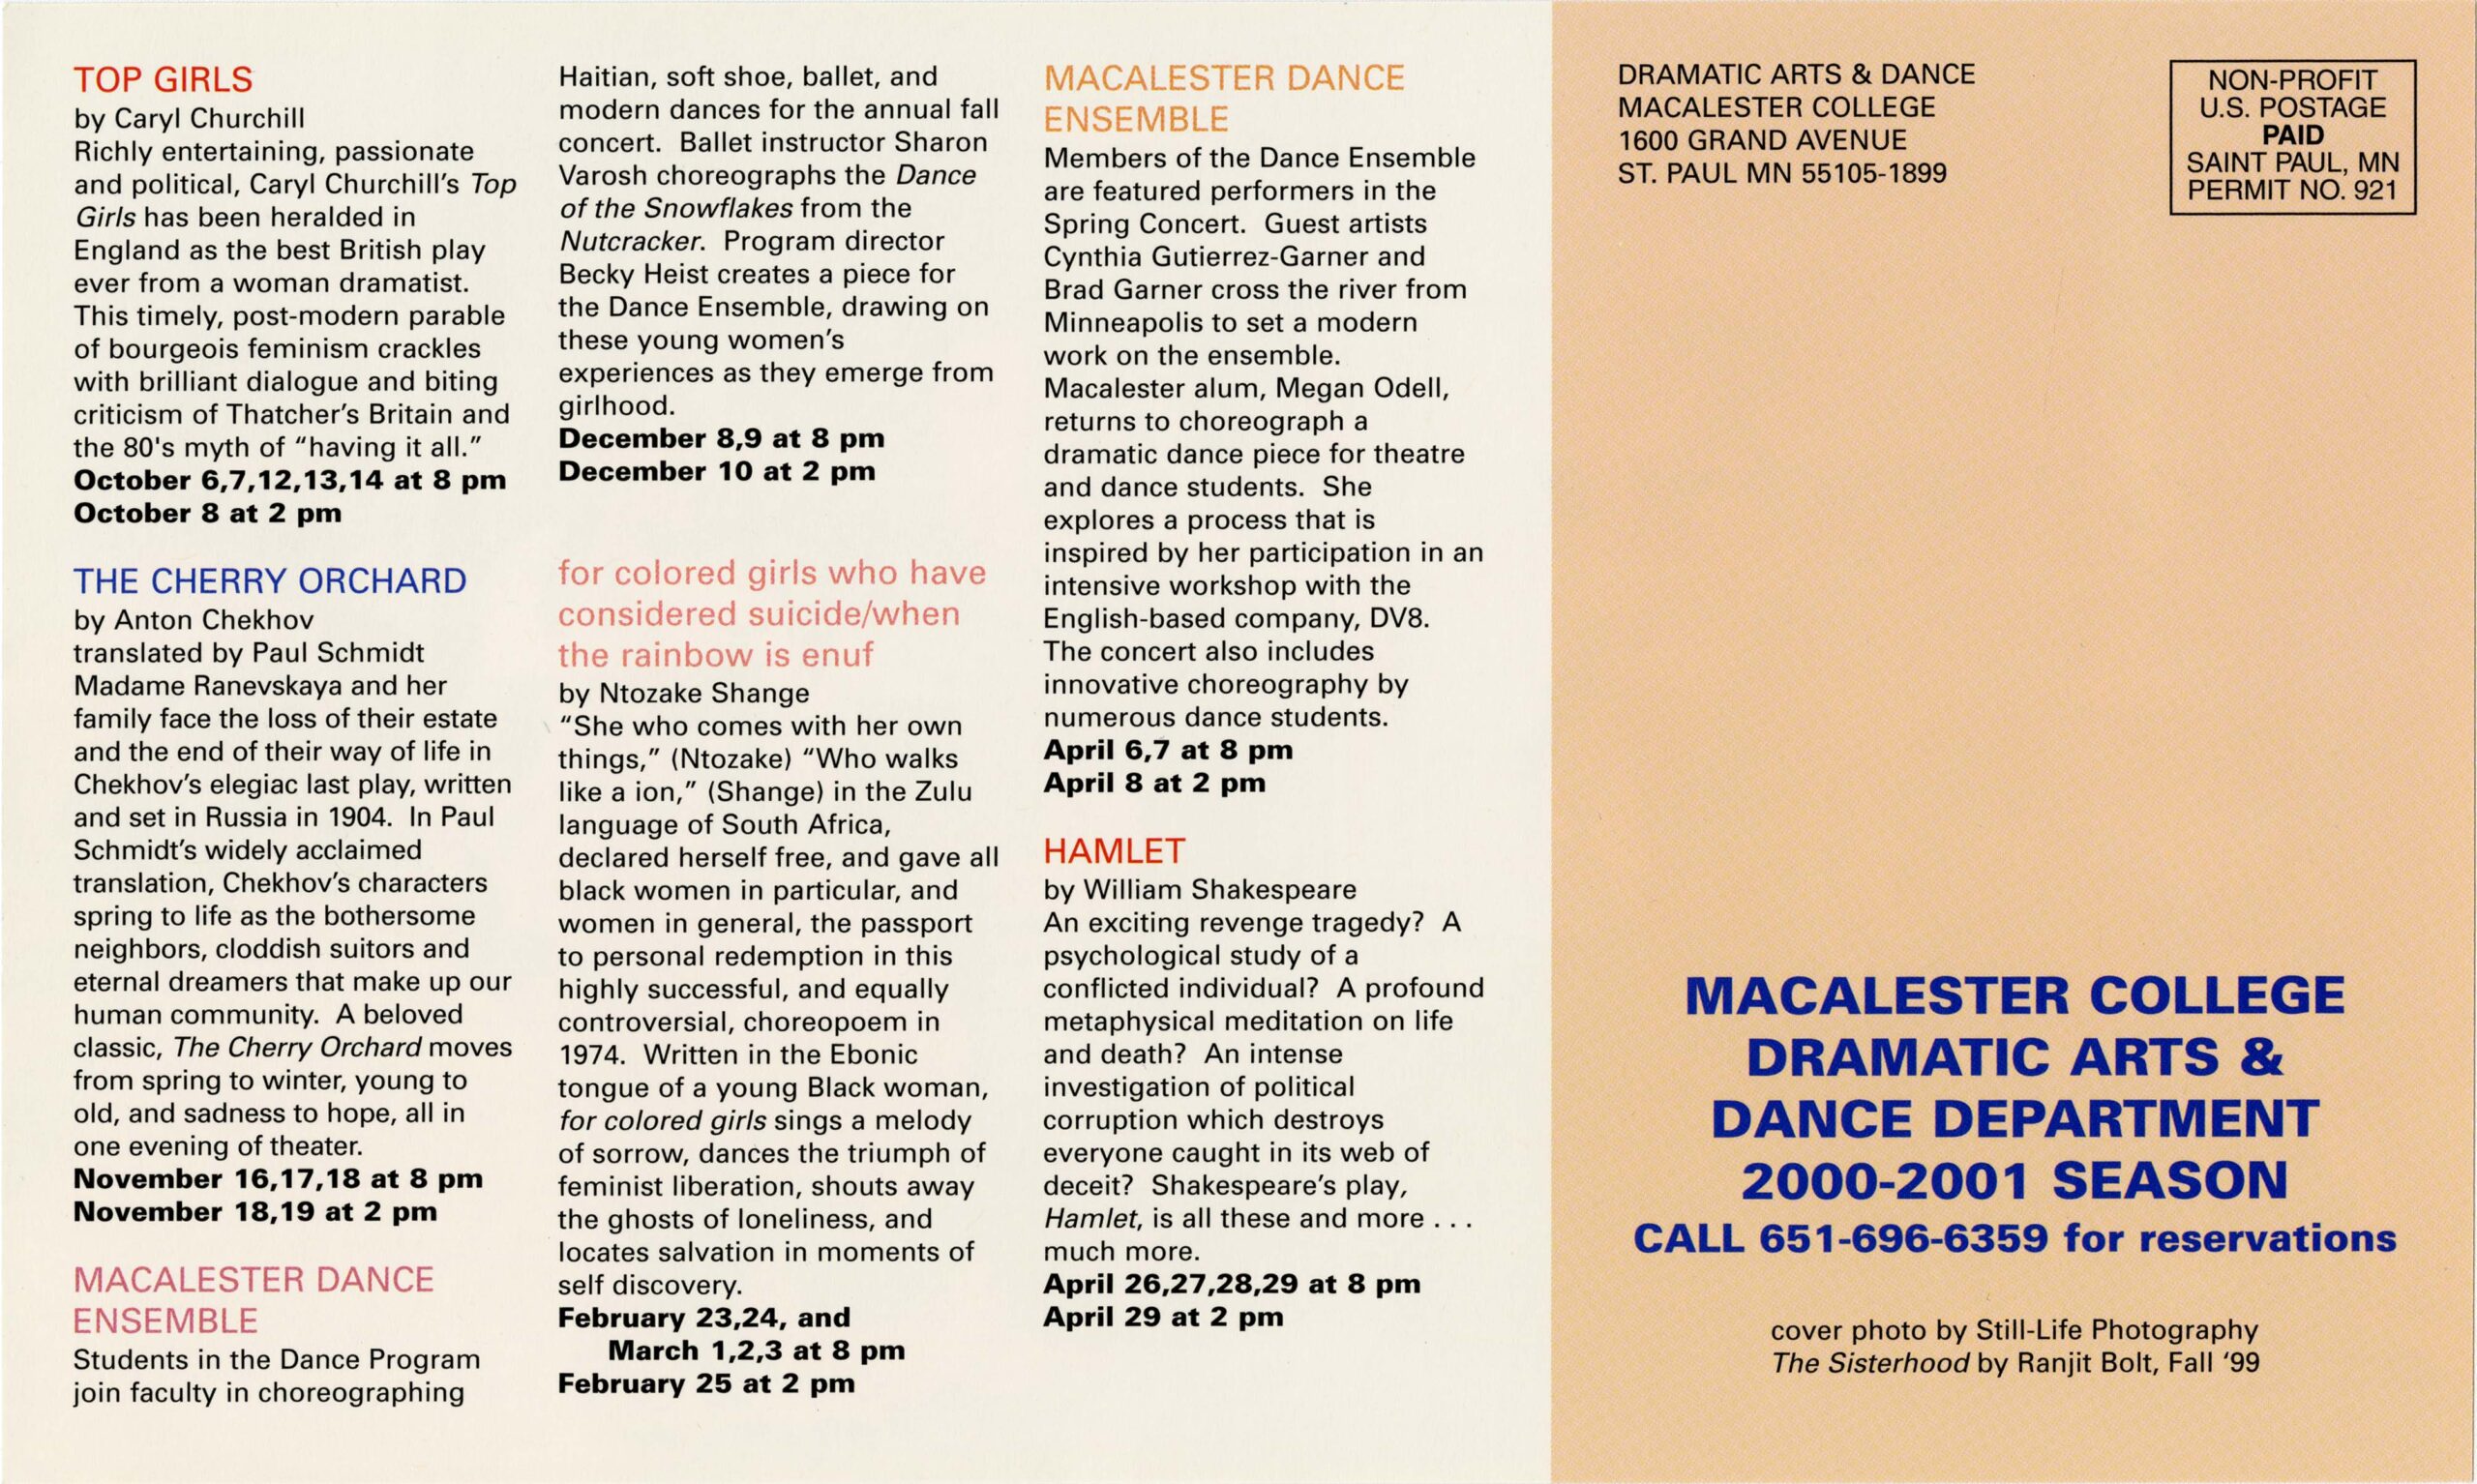 Overview of theater productions at Mac for 2000-20001 season